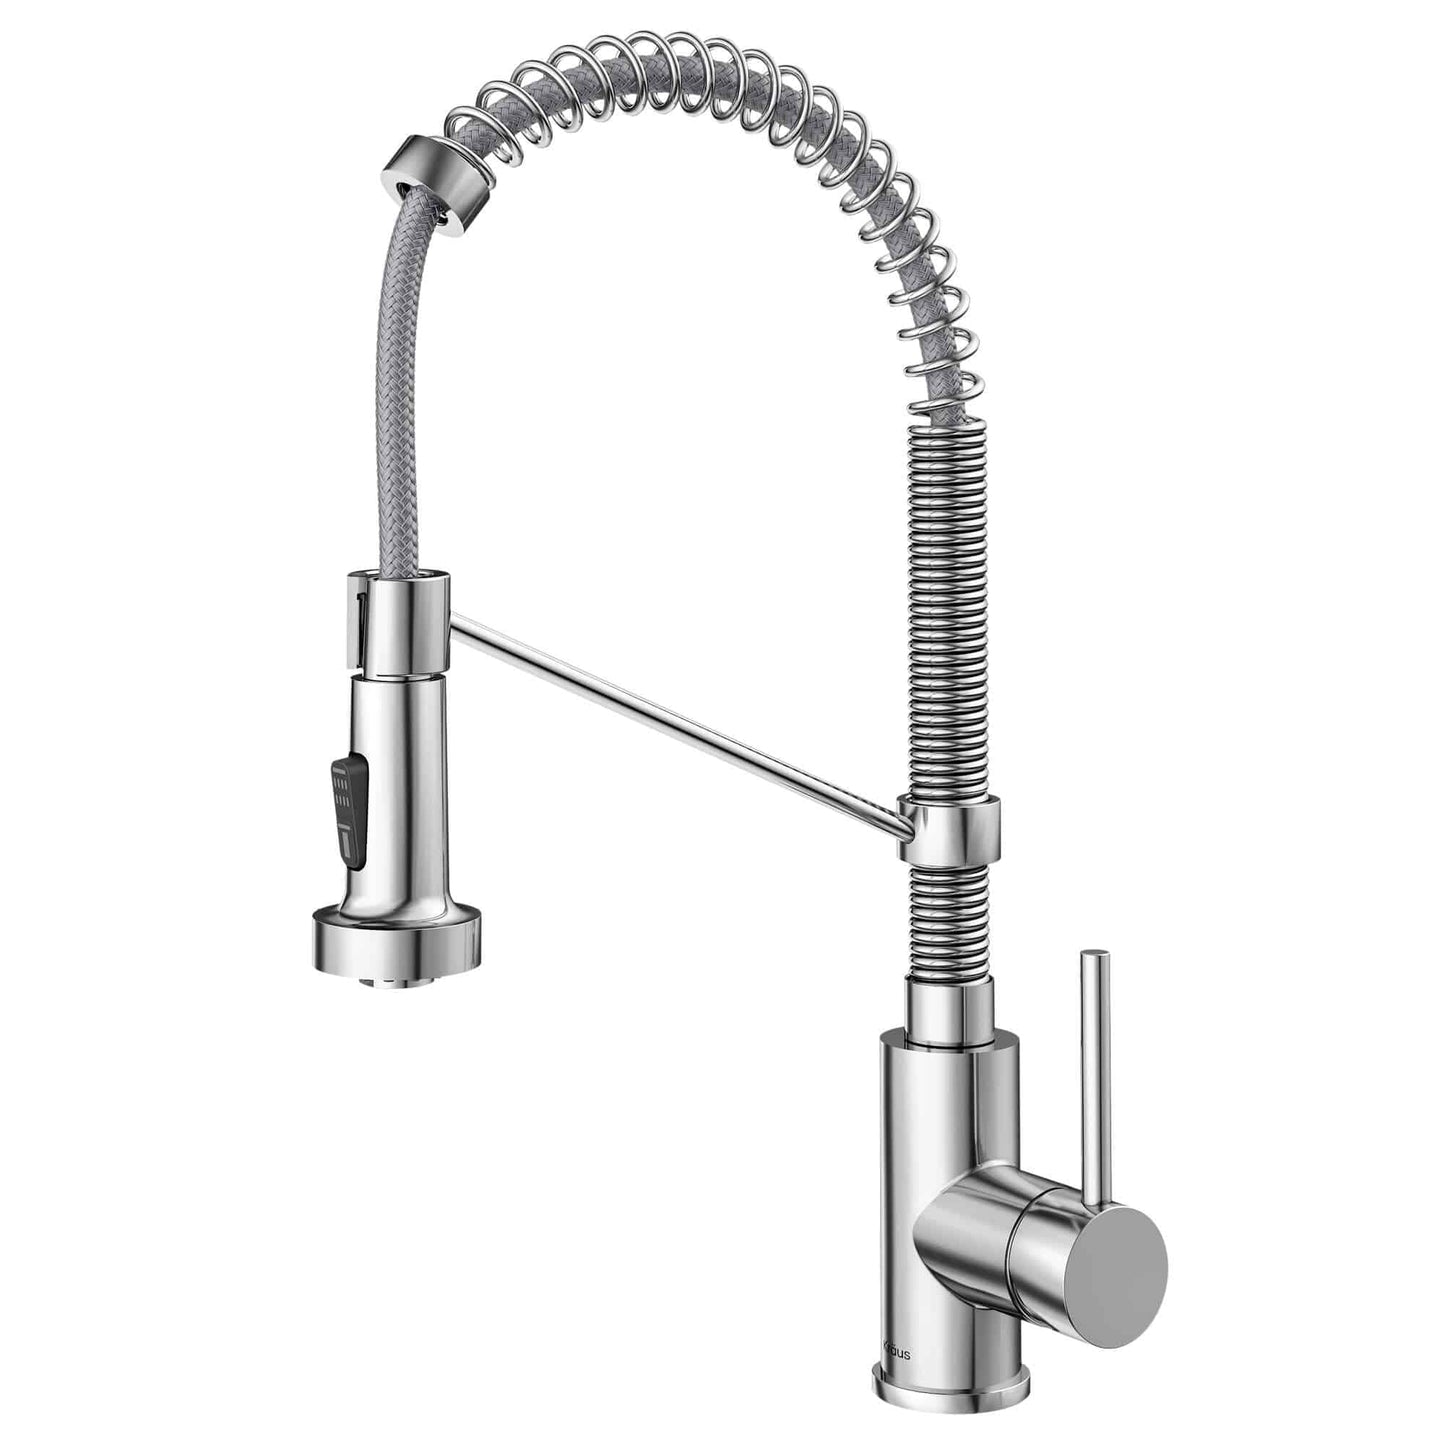 Kraus Bolden 18" Commercial Style Pull-Down Kitchen Faucet in Chrome